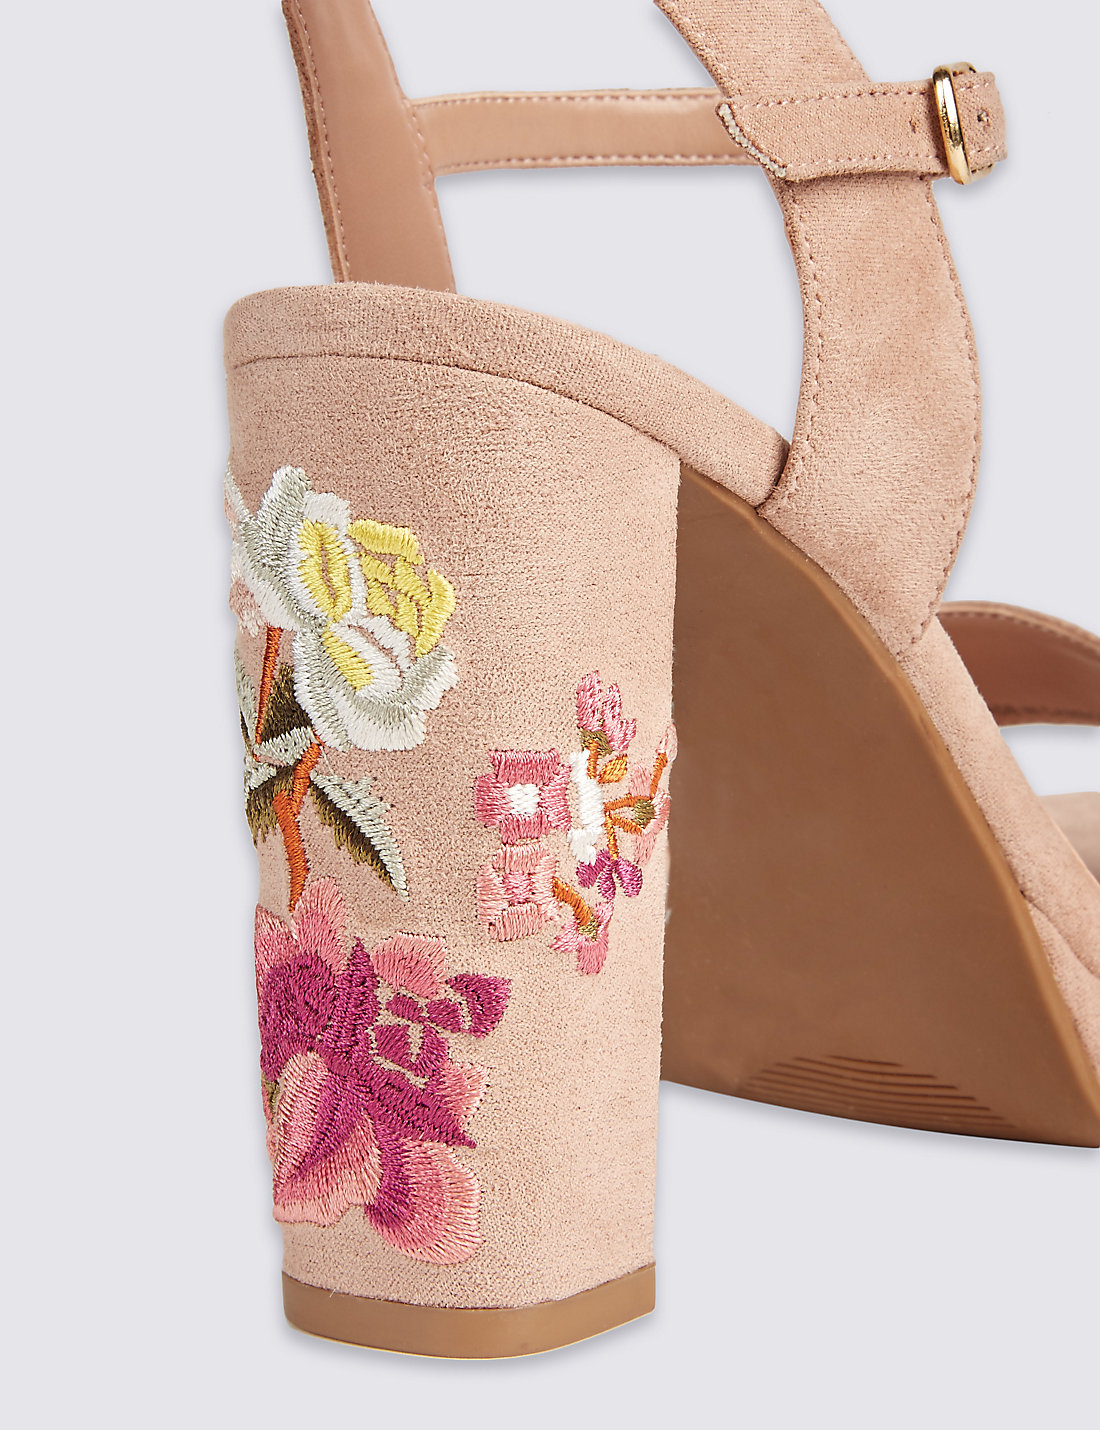 Embrace your feminine side with embroidery fashion this season